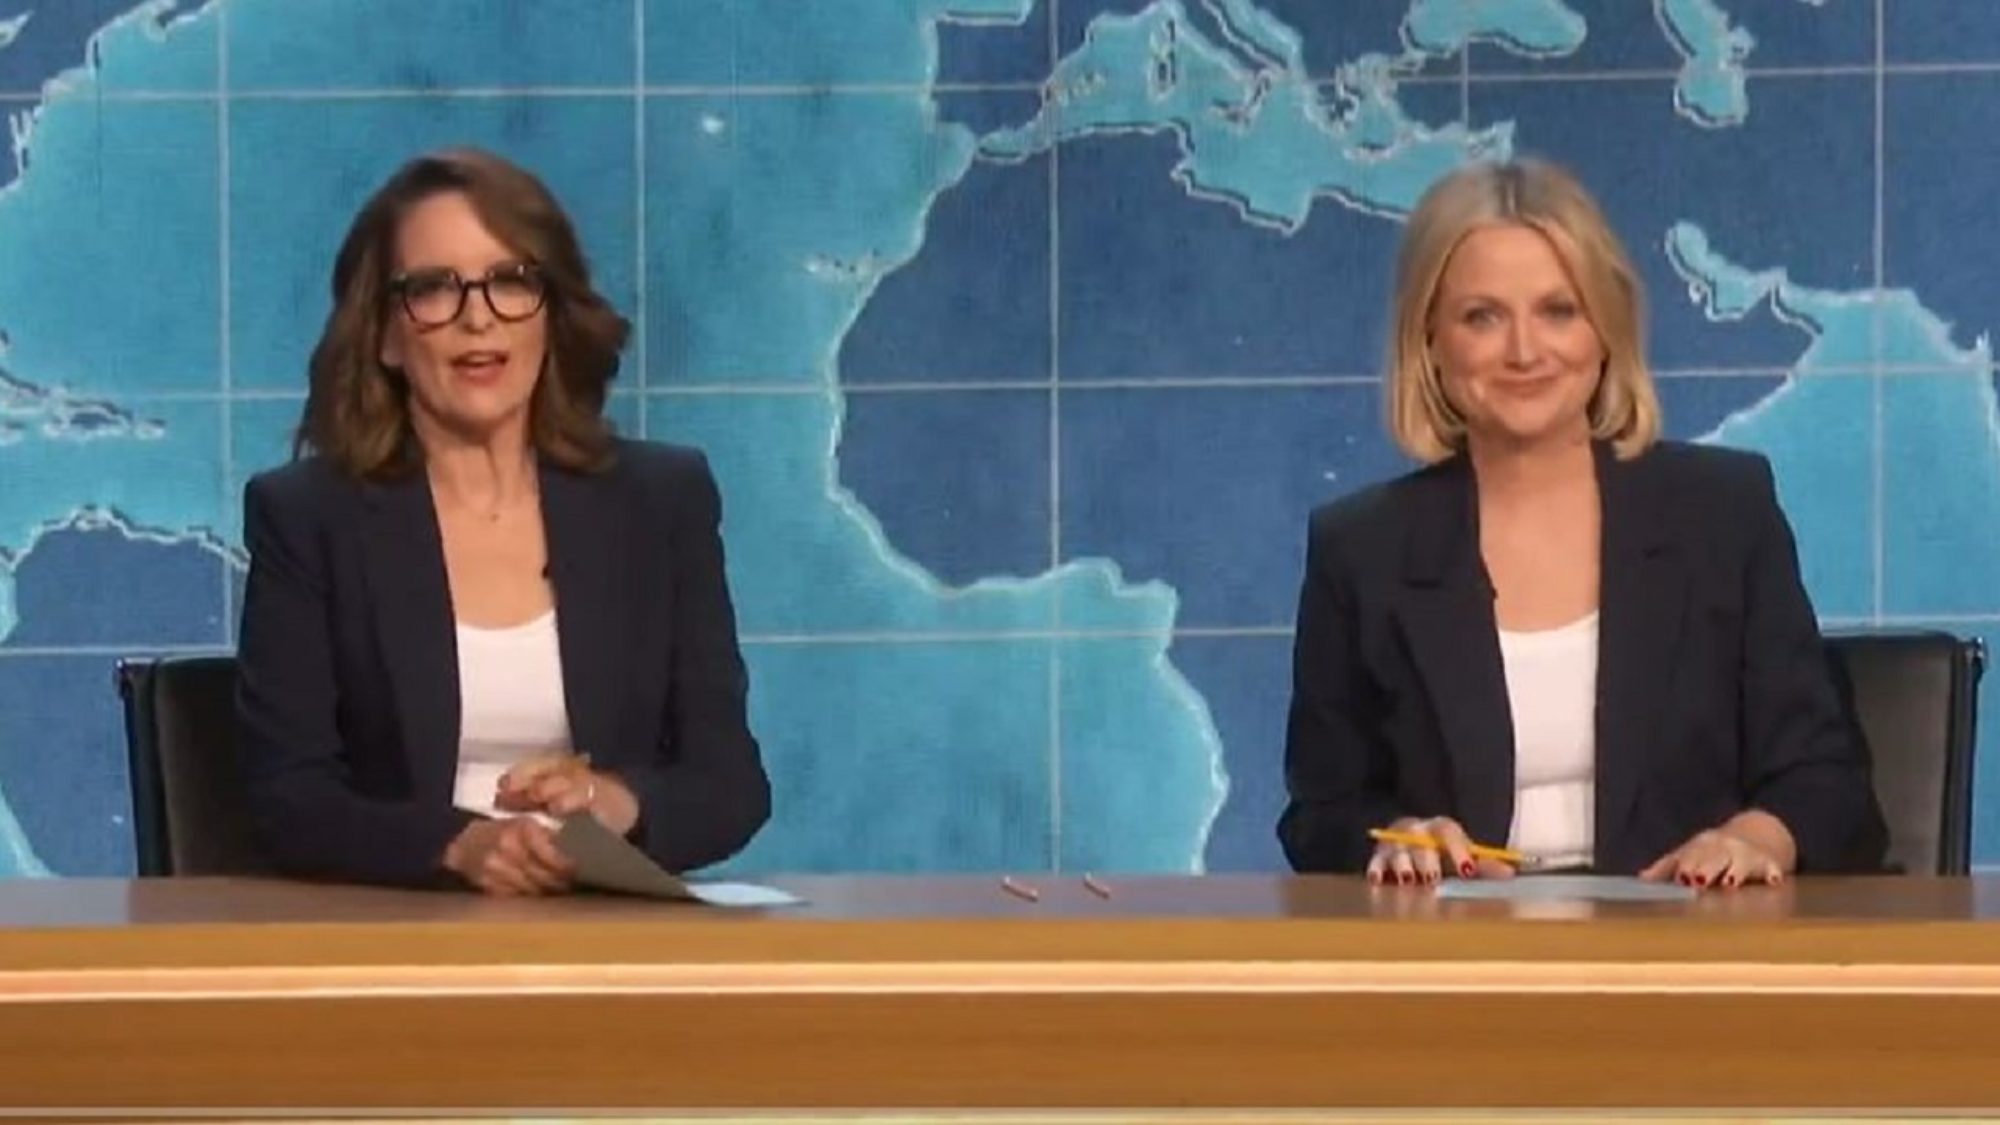 SNL Tina Fey and Amy Poehler Return to "Weekend Update" for Emmys